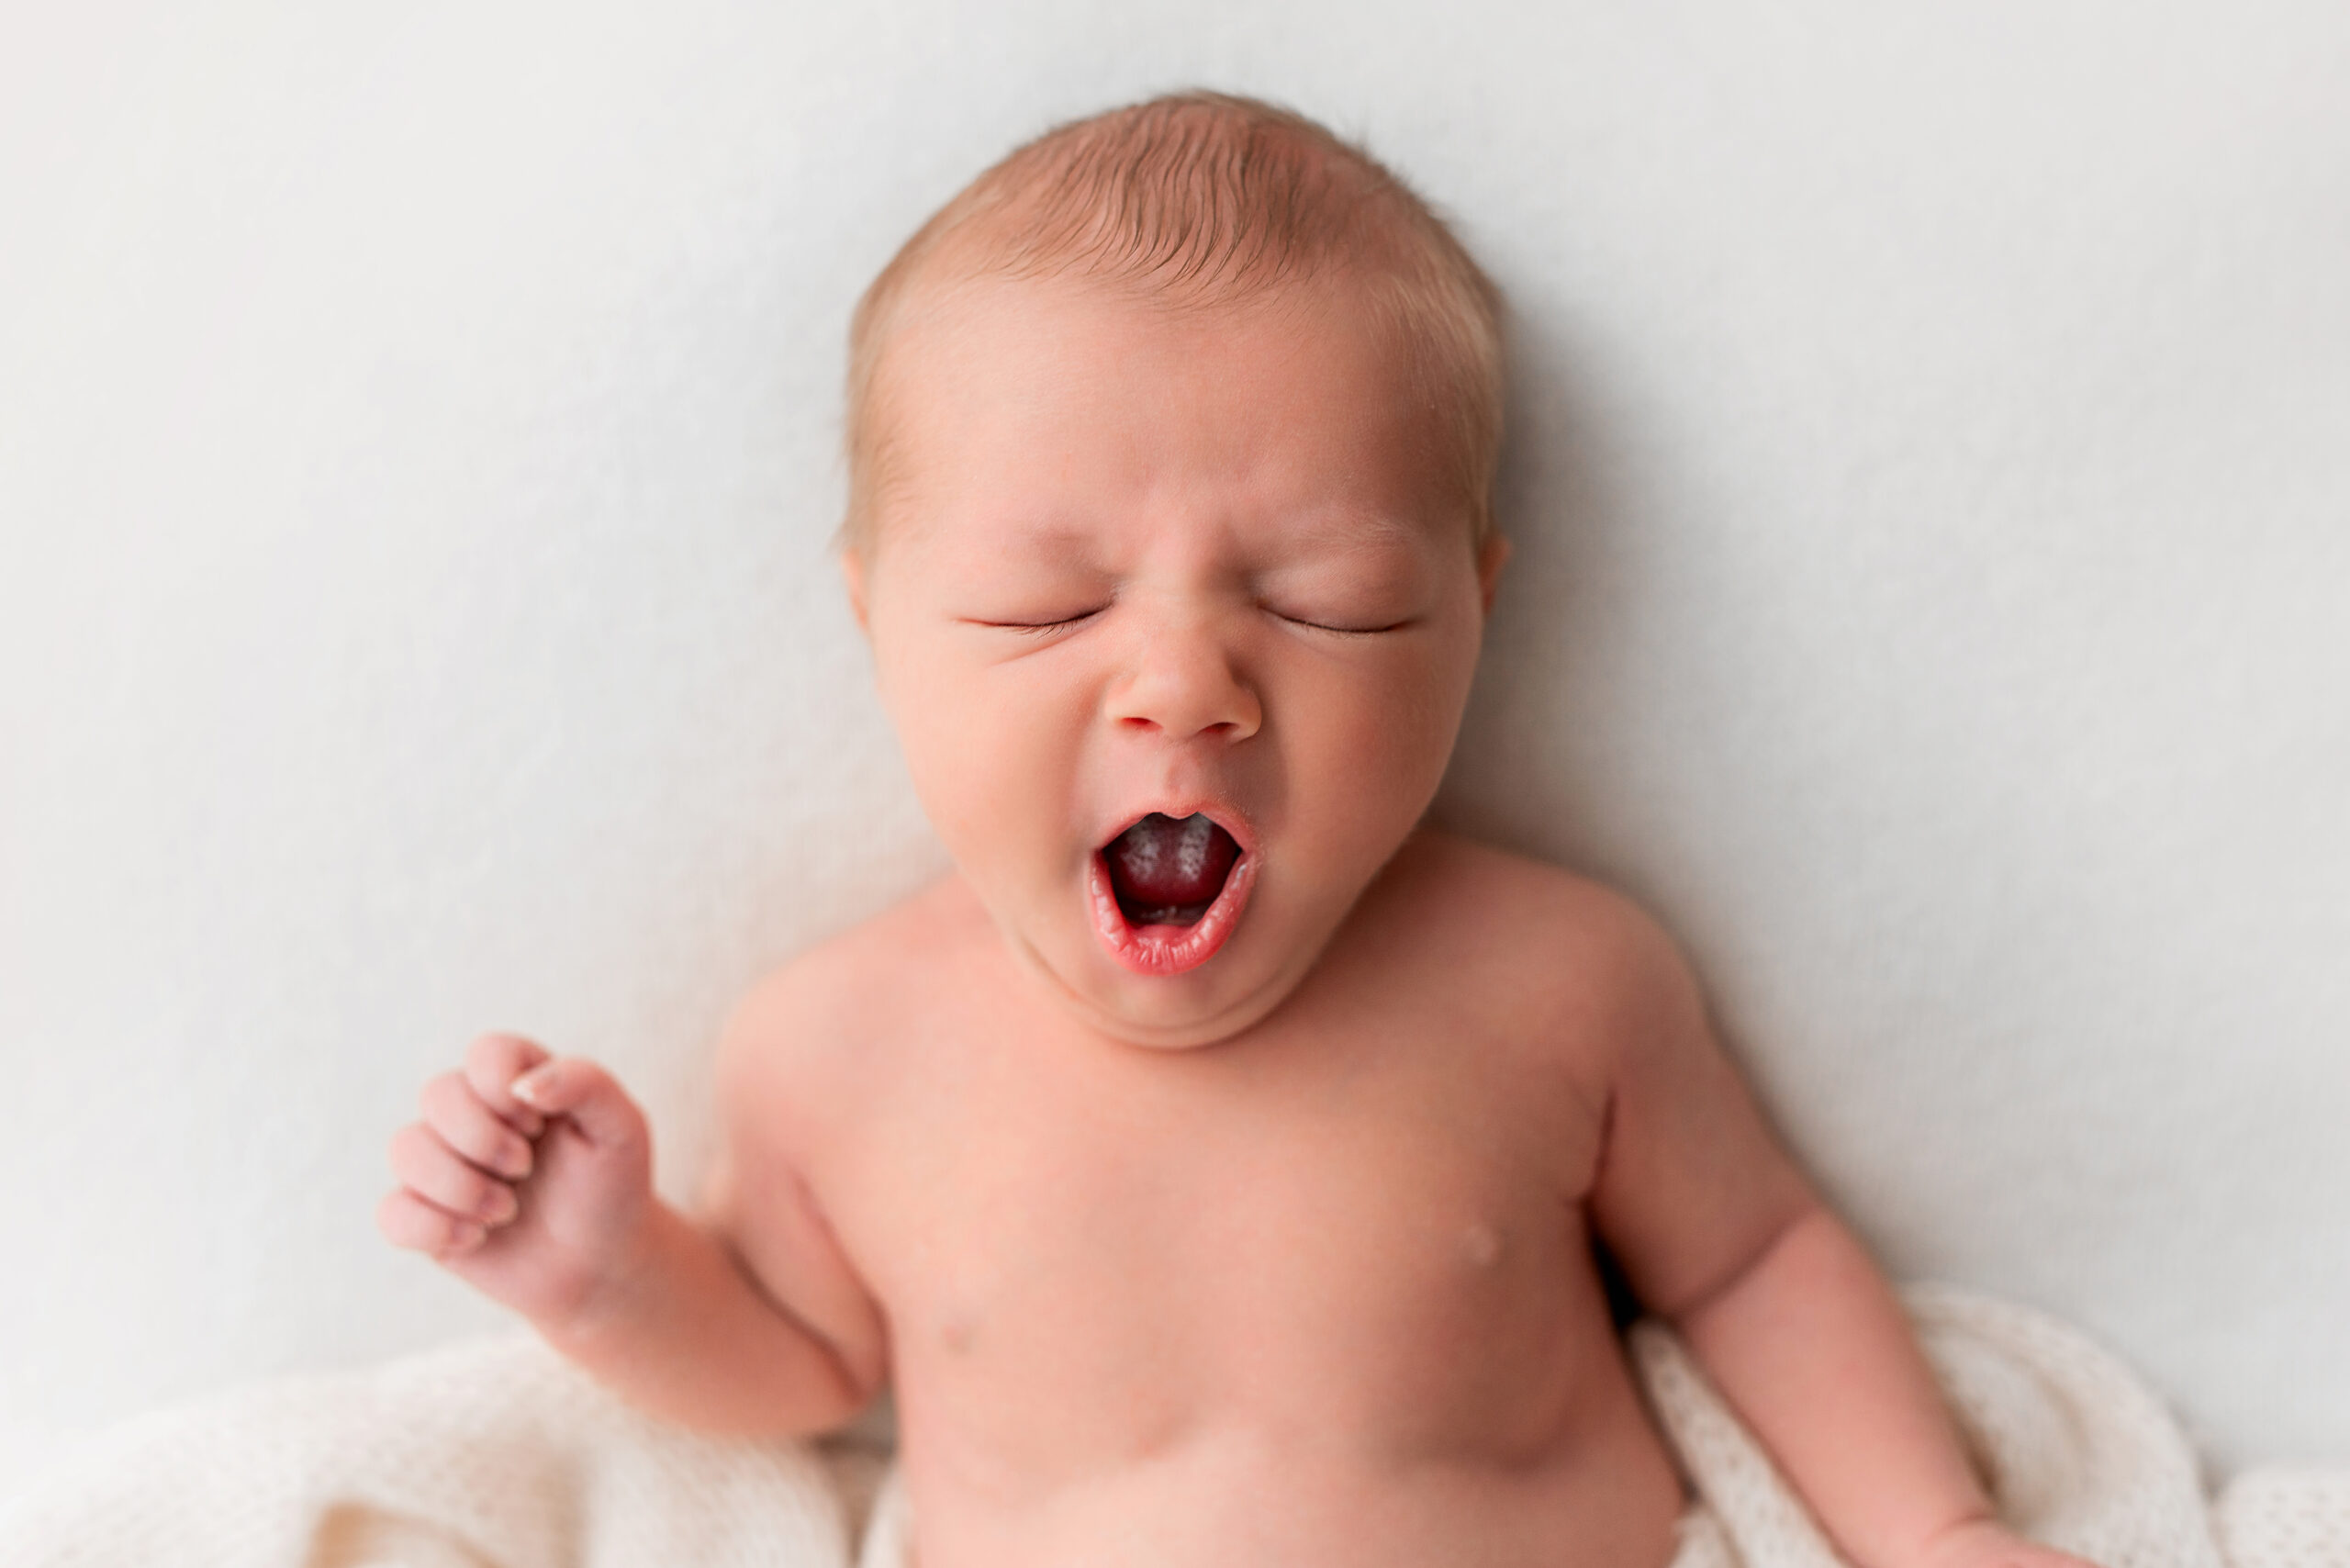 Baby Photographer Barnsley. A photo of a newborn baby laid yawning wide with his eyes tightly closed.